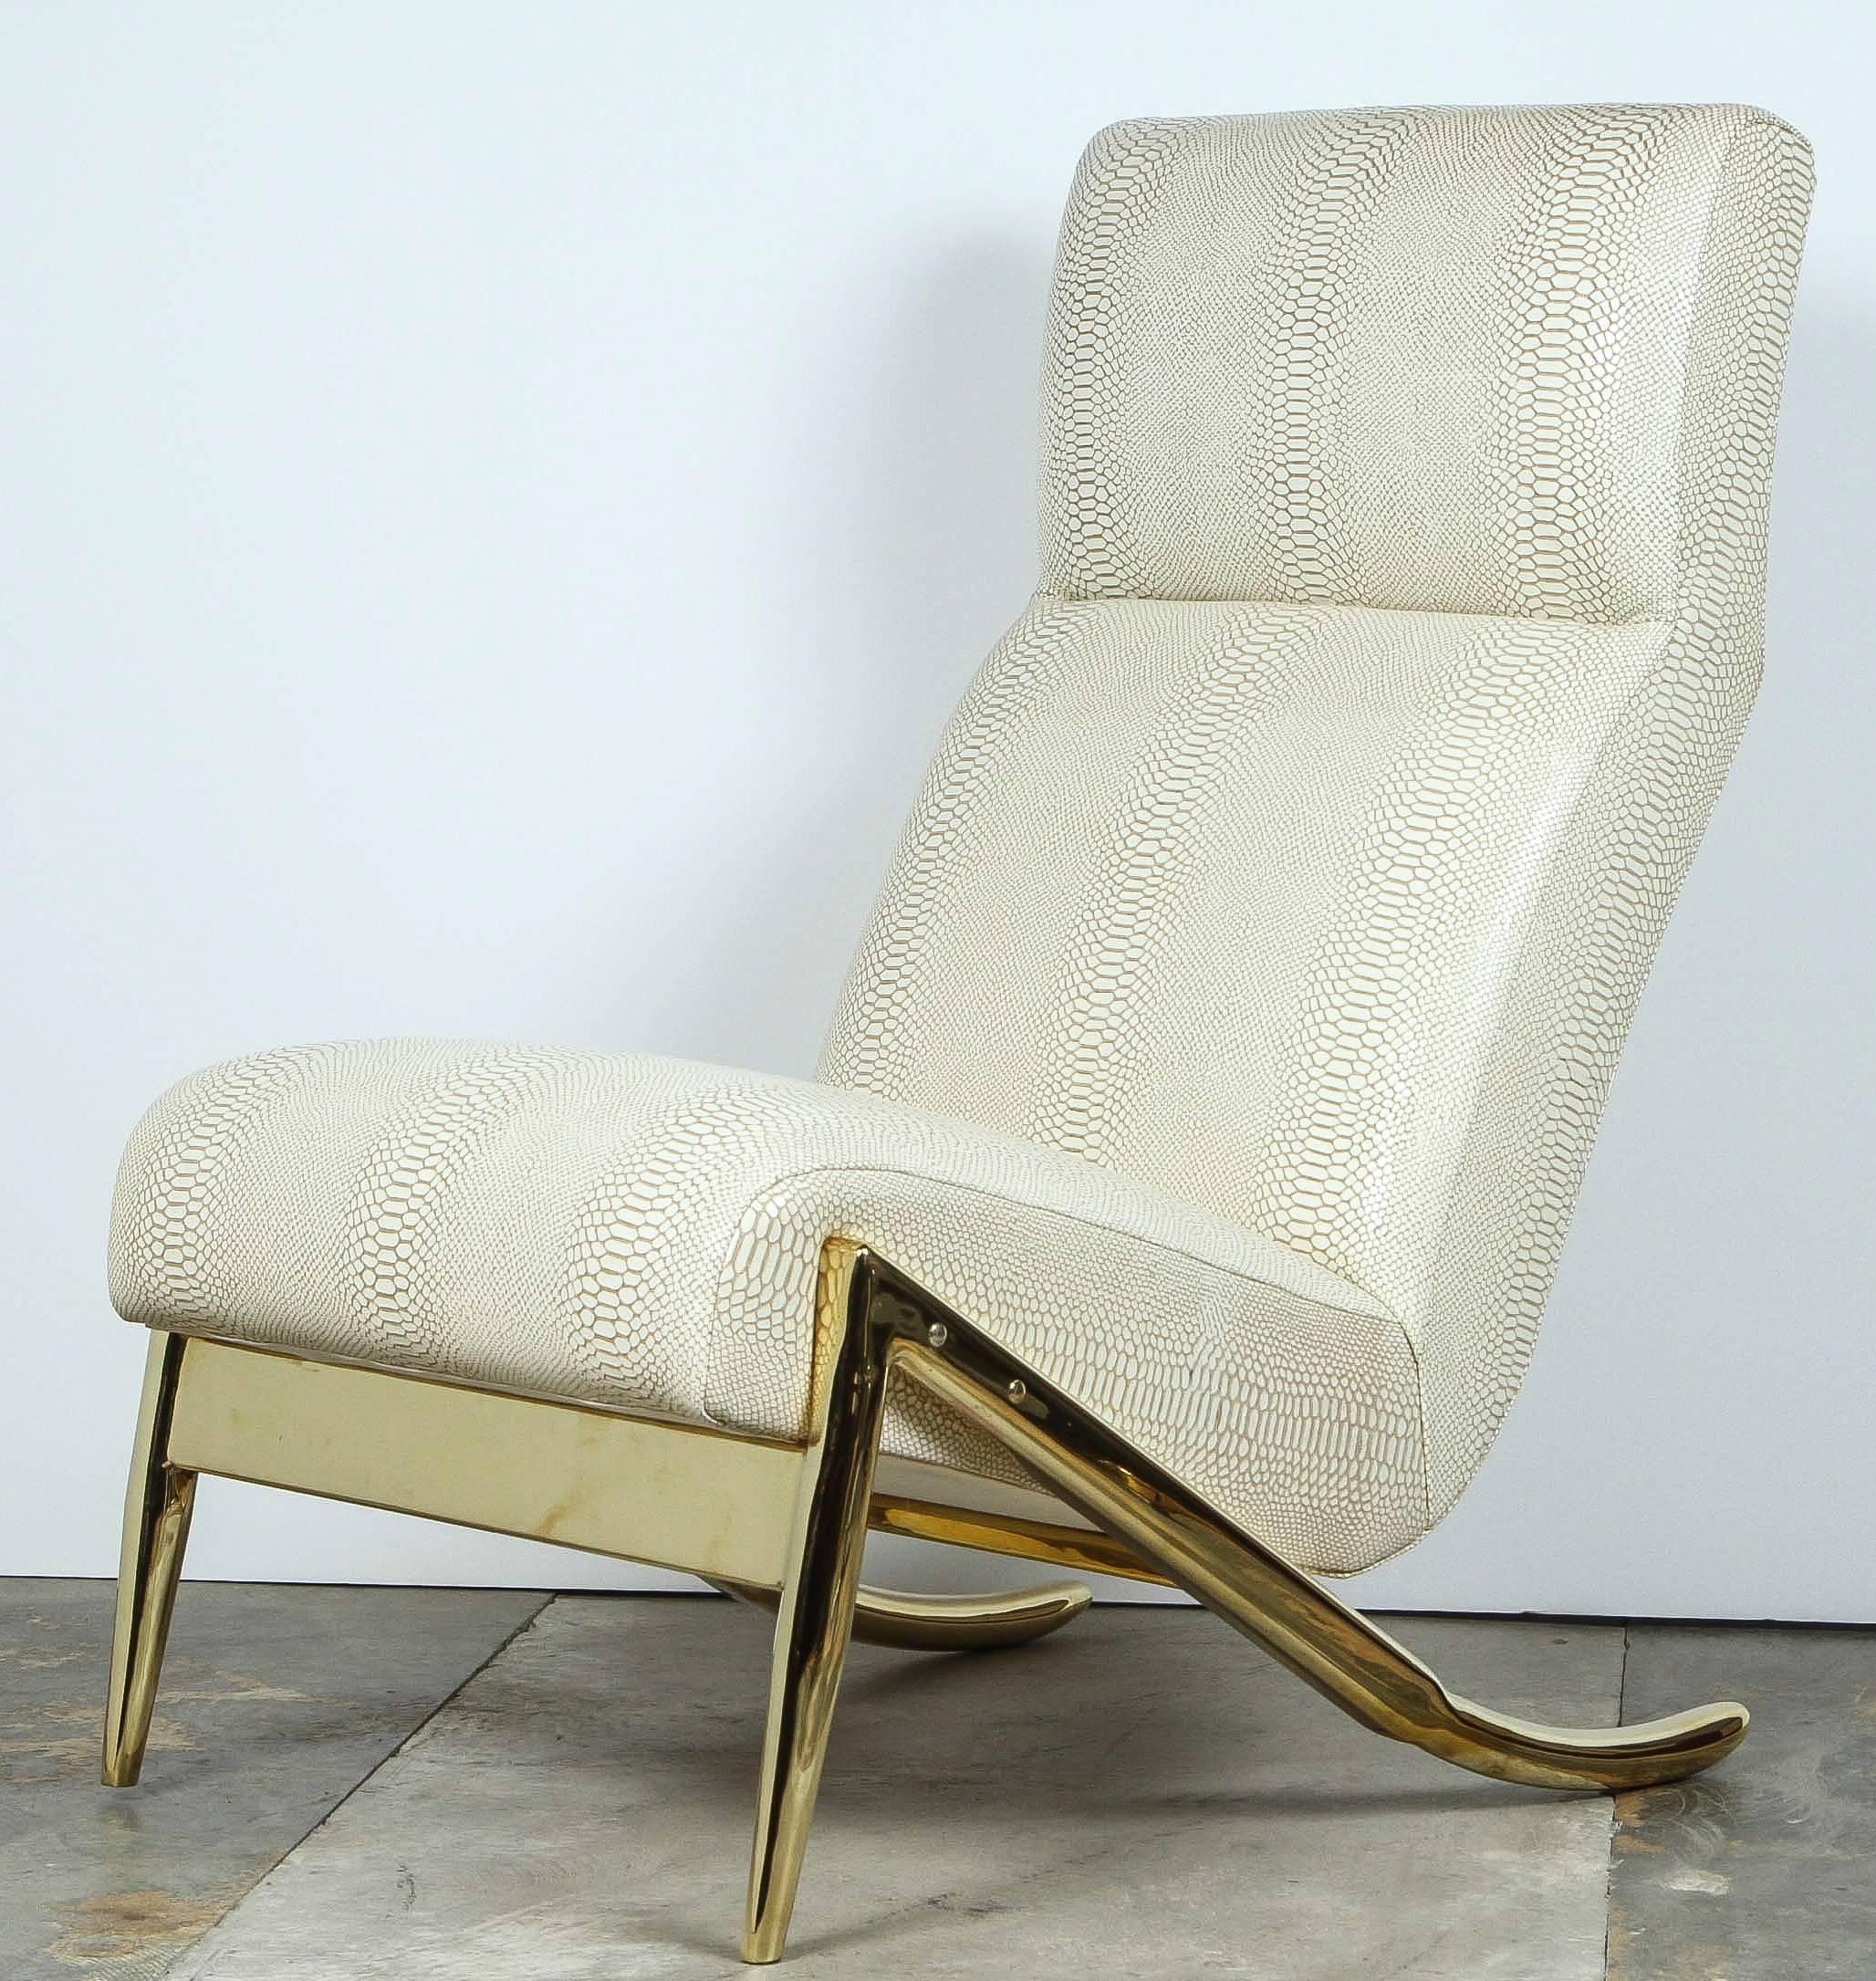 Contemporary Paul Marra Slipper Chair in unlacquered polished brass and upholstered in faux python. Brass is unlacquered therefore will patina naturally.  Faux python is by availability and may vary from imaging.  By order. Price quoted is per each. 